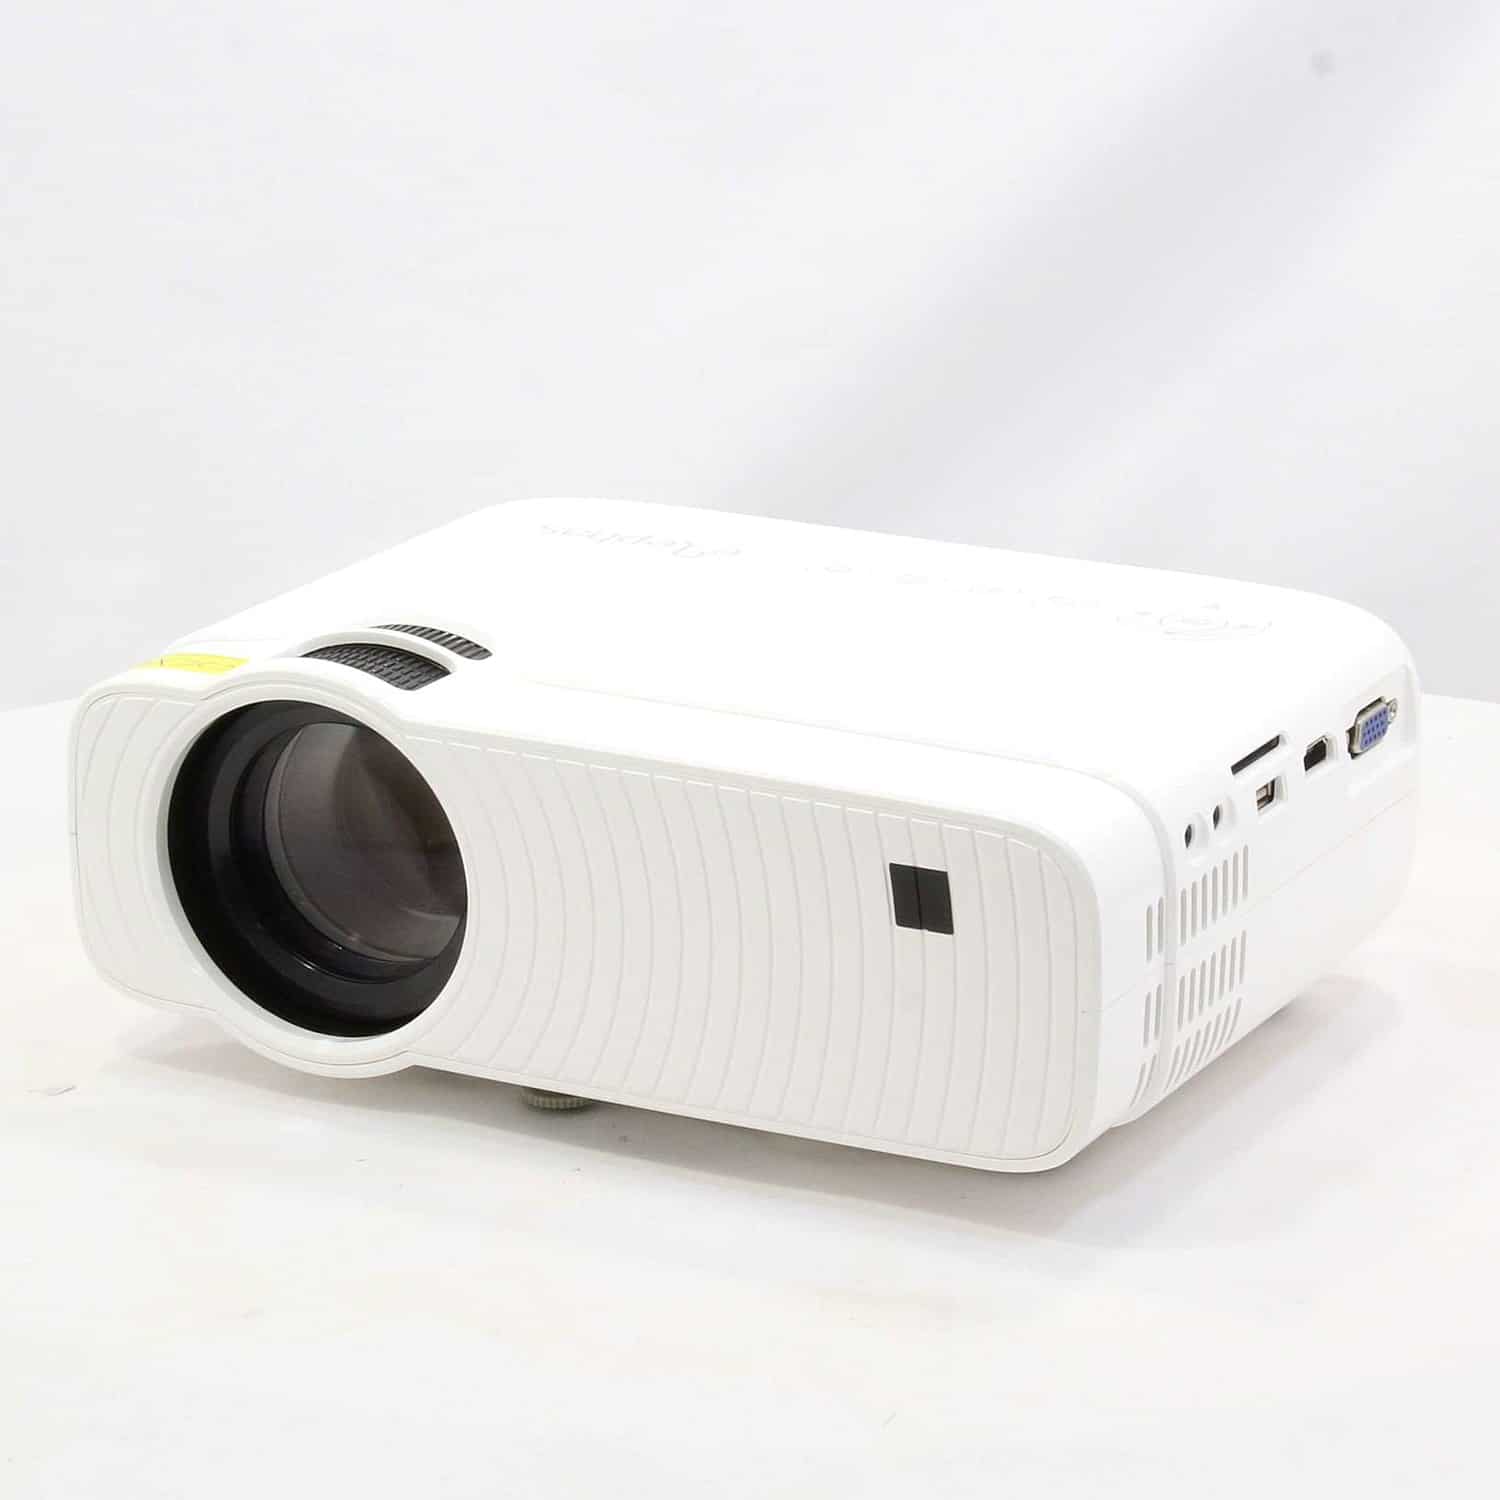 Elephas Projectors Official Website - Mini, Video, and WiFi Models